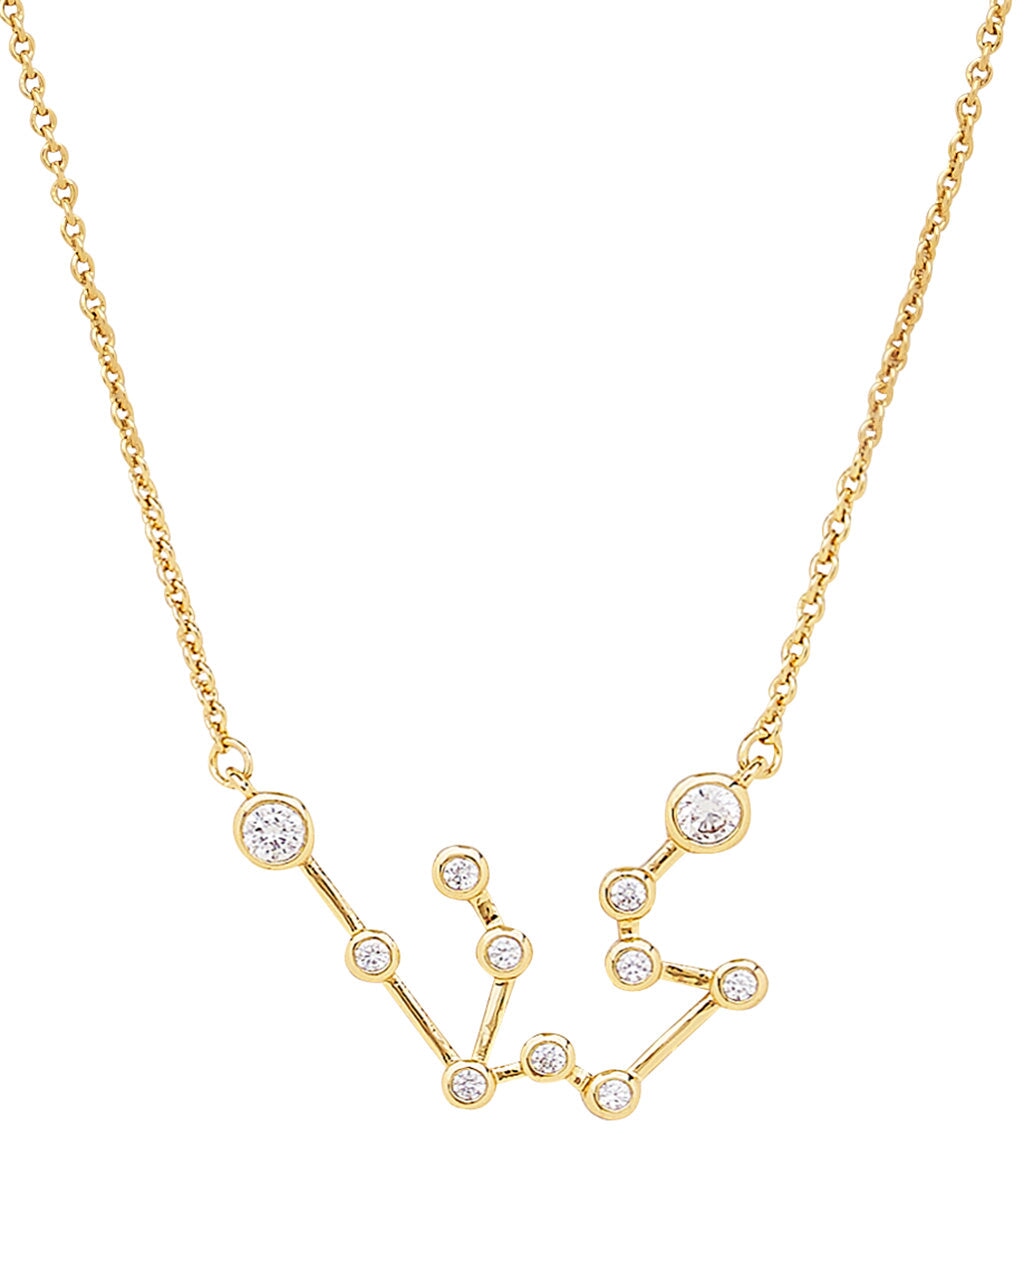 'When Stars Align' Constellation Necklace Necklace Sterling Forever Gold Aquarius (Jan 20 - Feb 18) 